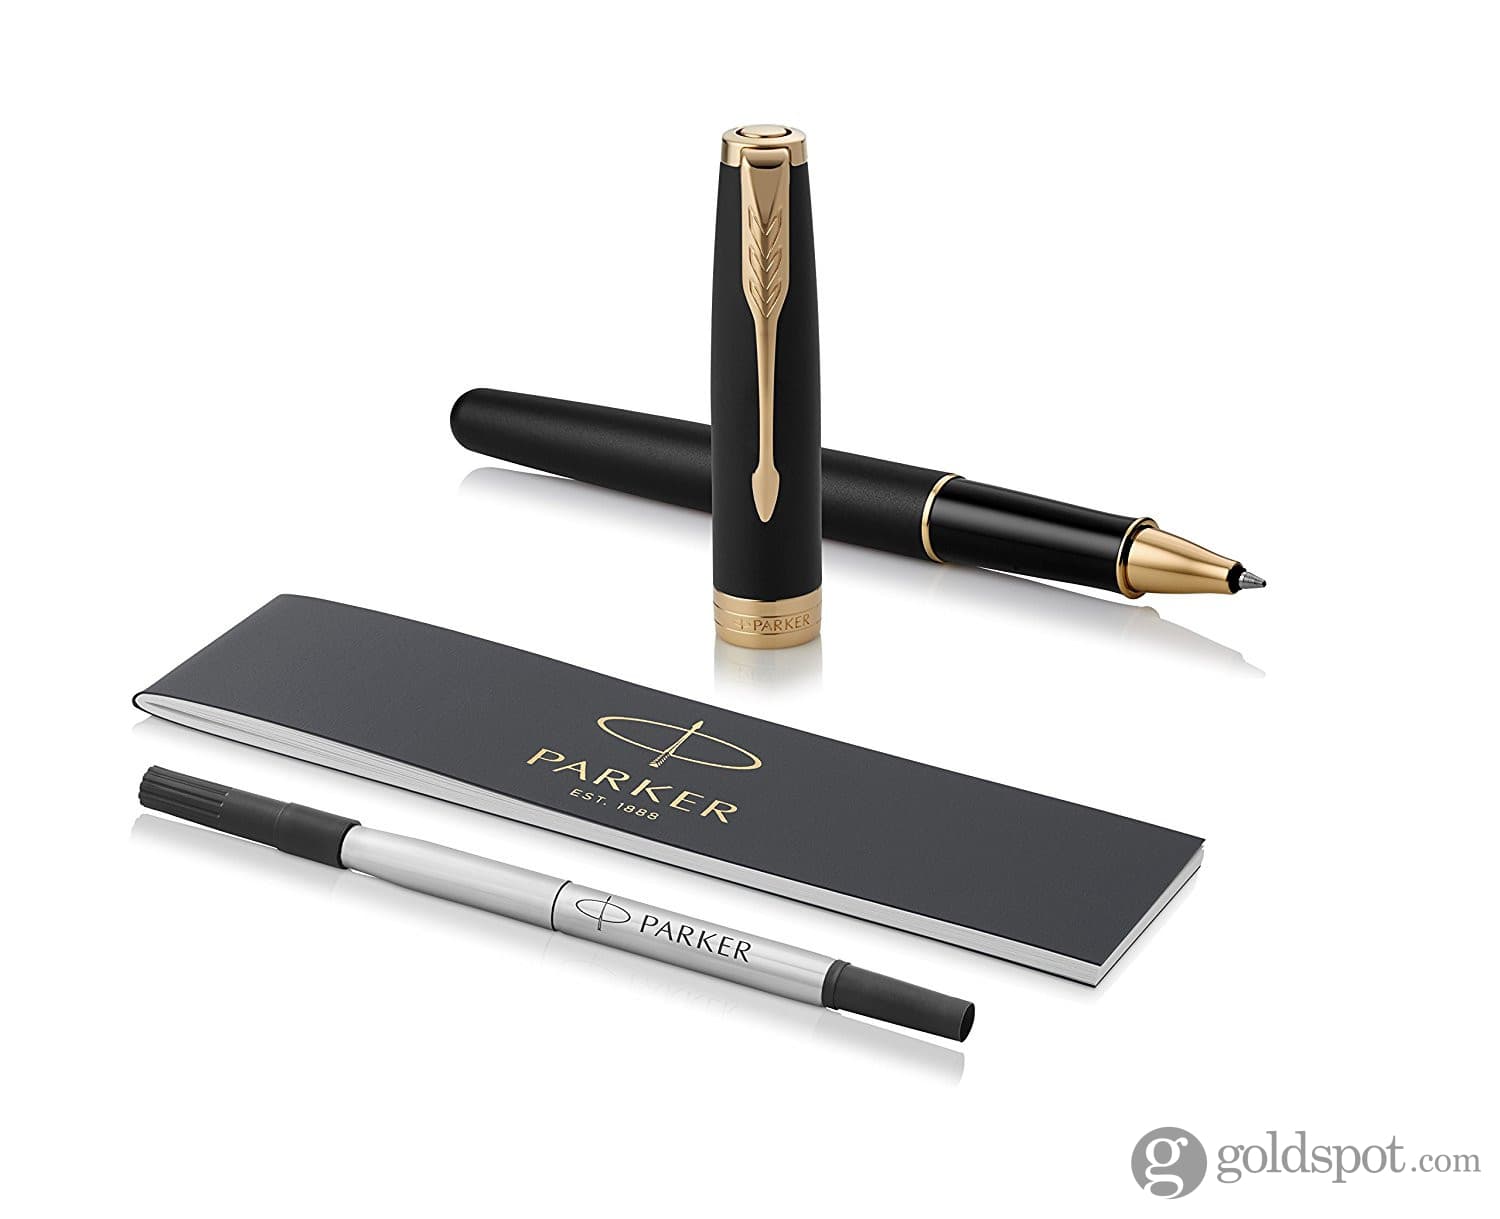 Luxury Metal 901 Fountain Pen Business Stationery Office Supplies